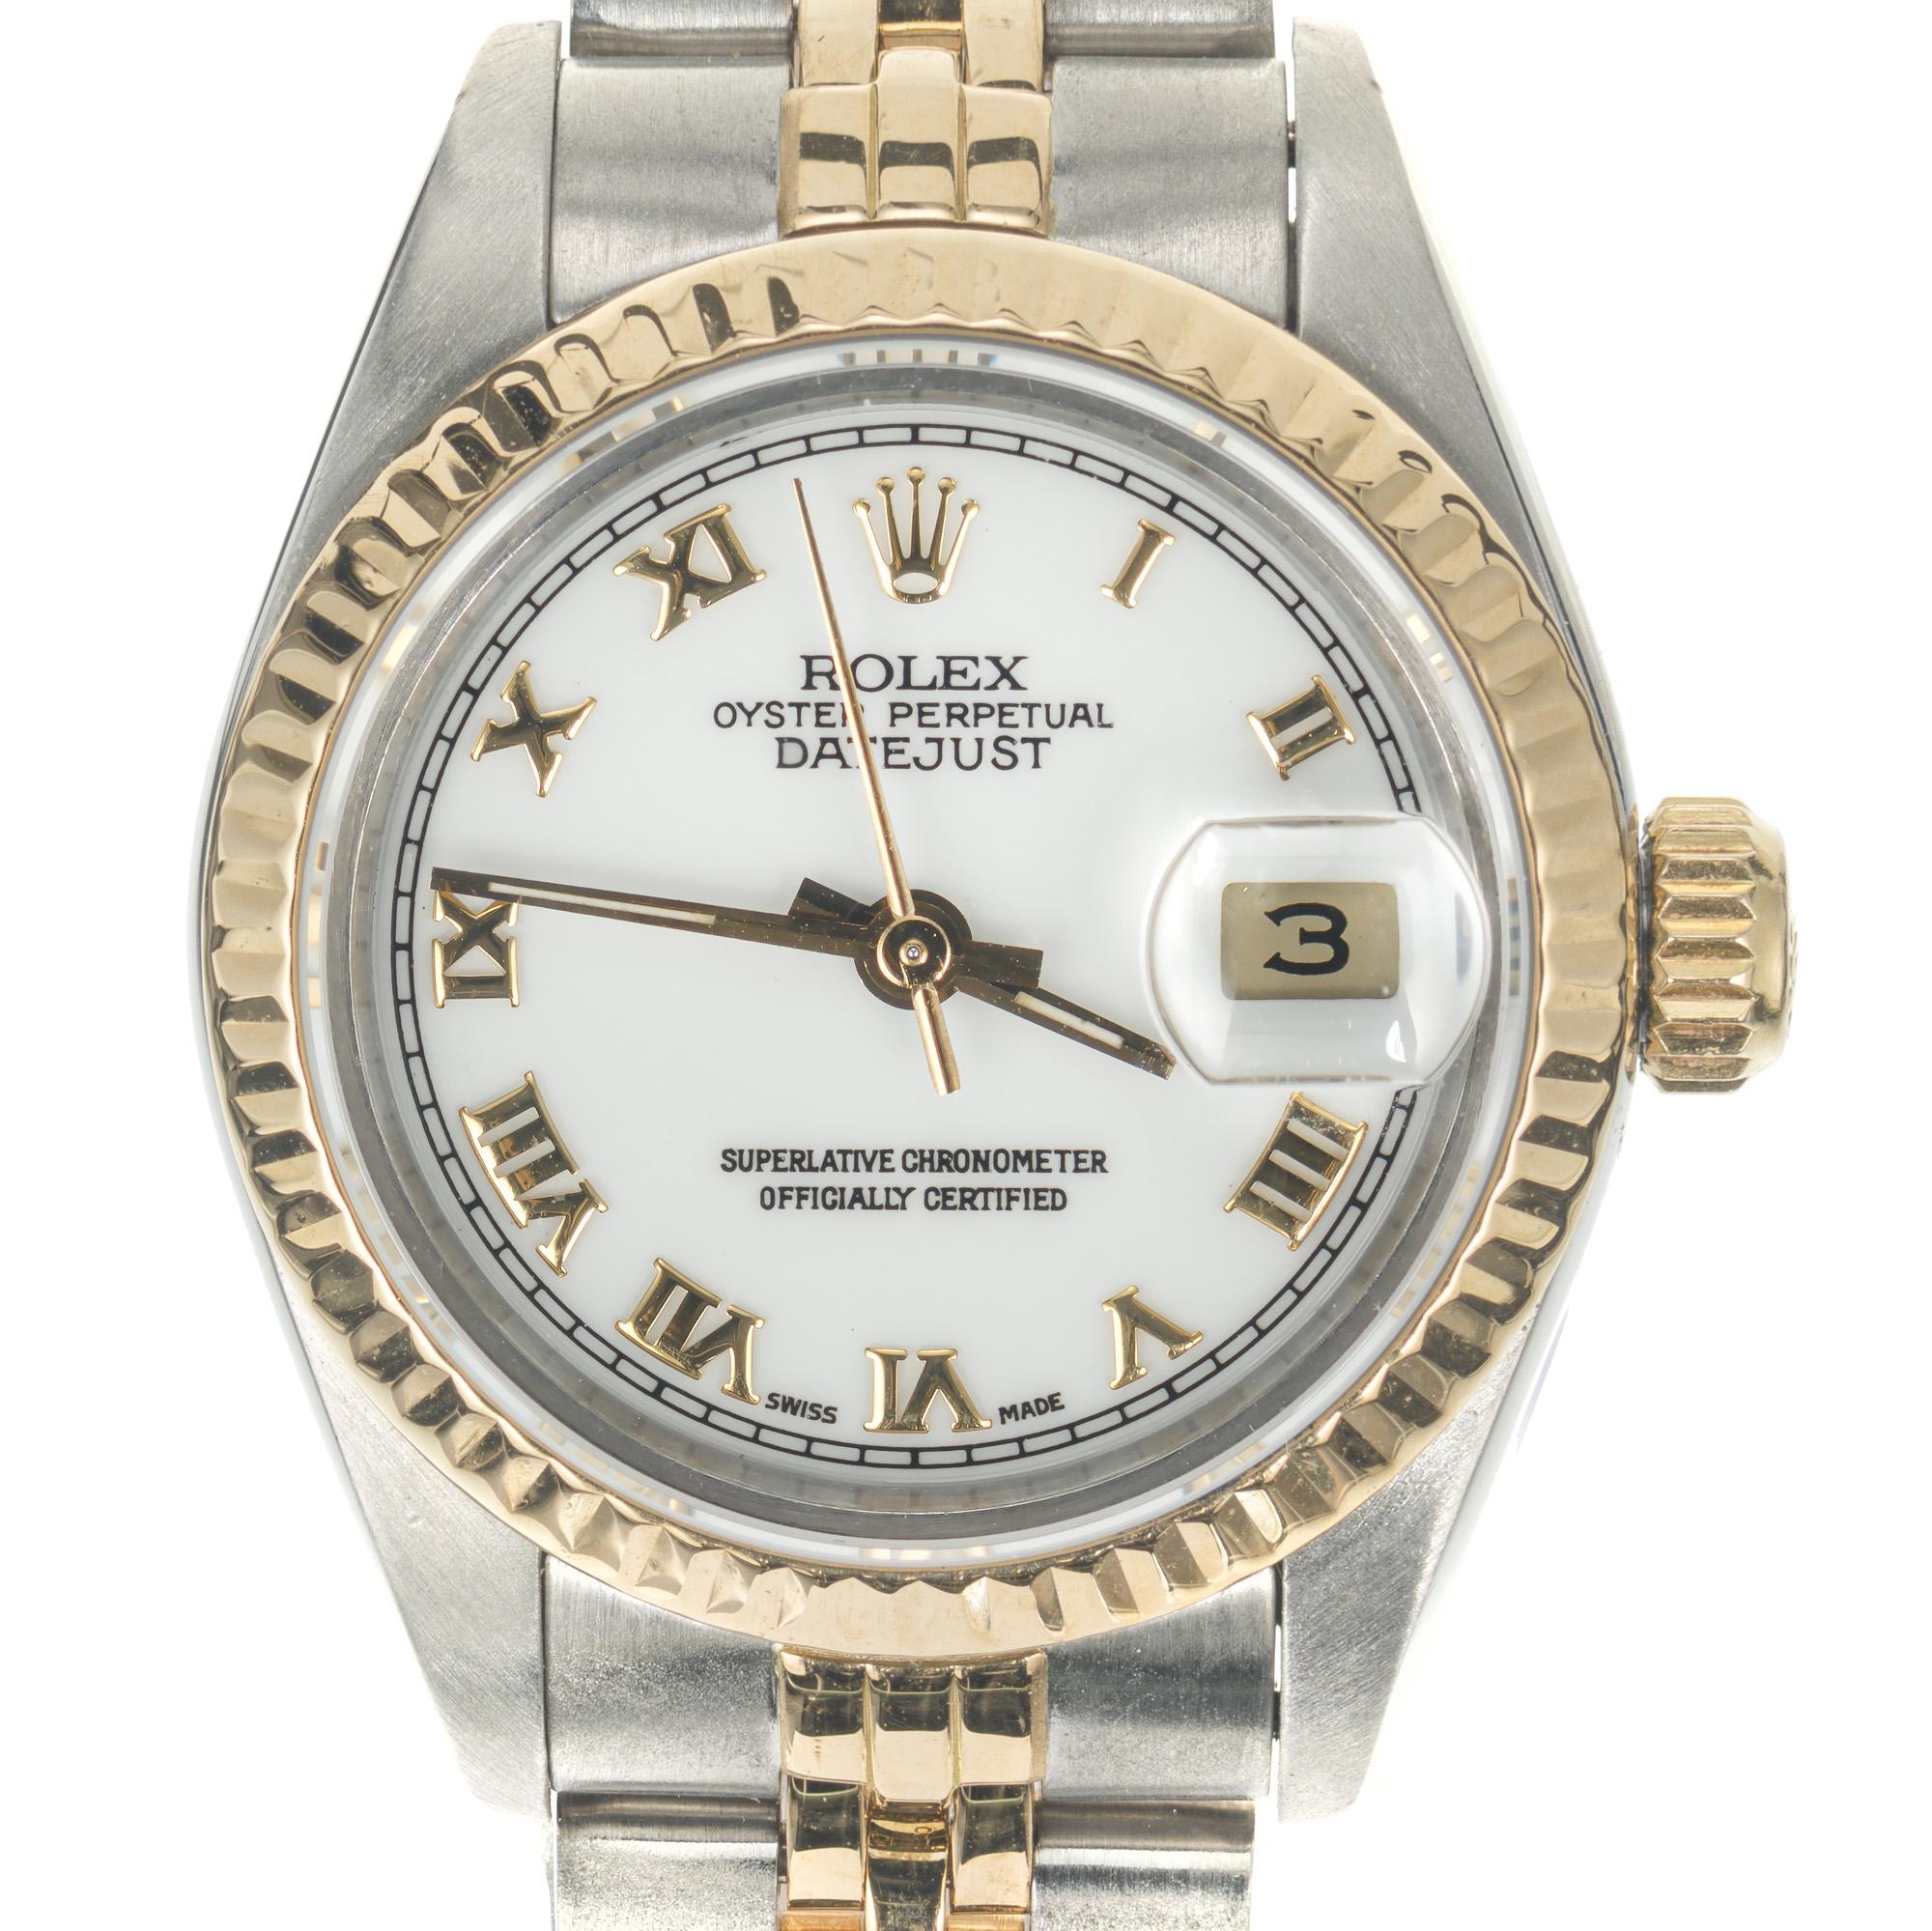 Ladies restored mid 1980's Rolex Datejust women's wristwatch. 18k yellow gold and steel jubilee band and case. White dial with Roman numeral markers.  

Length: 32mm
Width: 26mm
Band width at case: 13mm
Case thickness: 11.56mm
Band: two tone